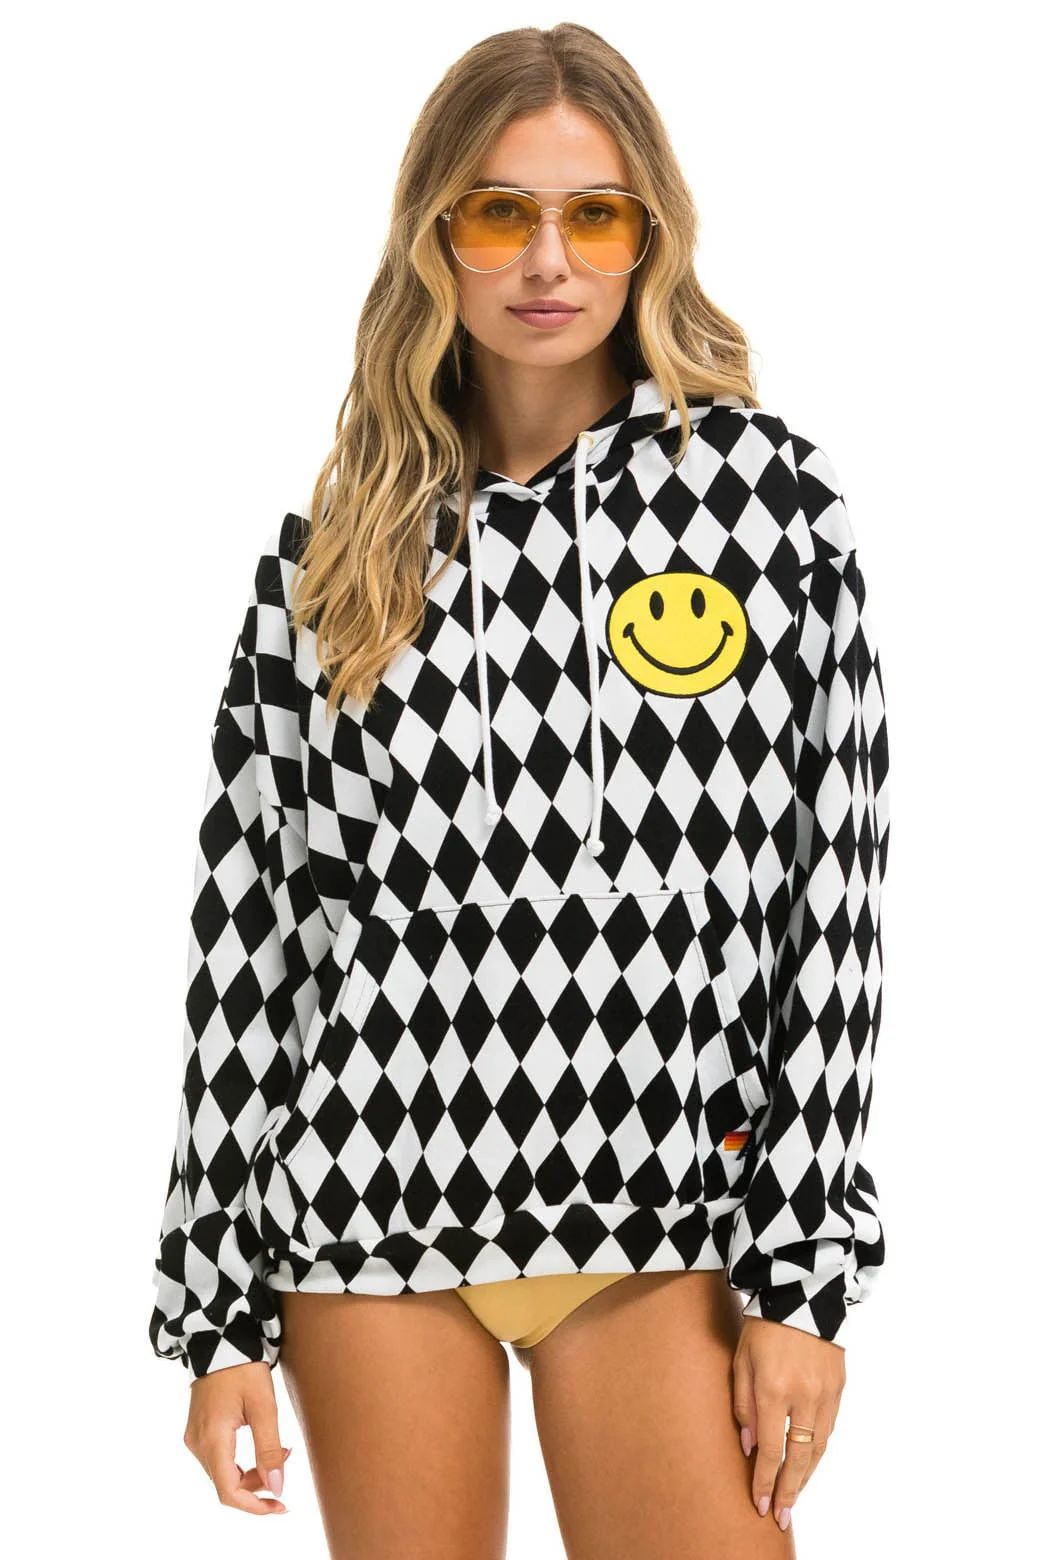 DIAMOND SMILEY 2 EMBRIODERY RELAXED PULLOVER HOODIE - WHITE // BLACK | Aviator Nation